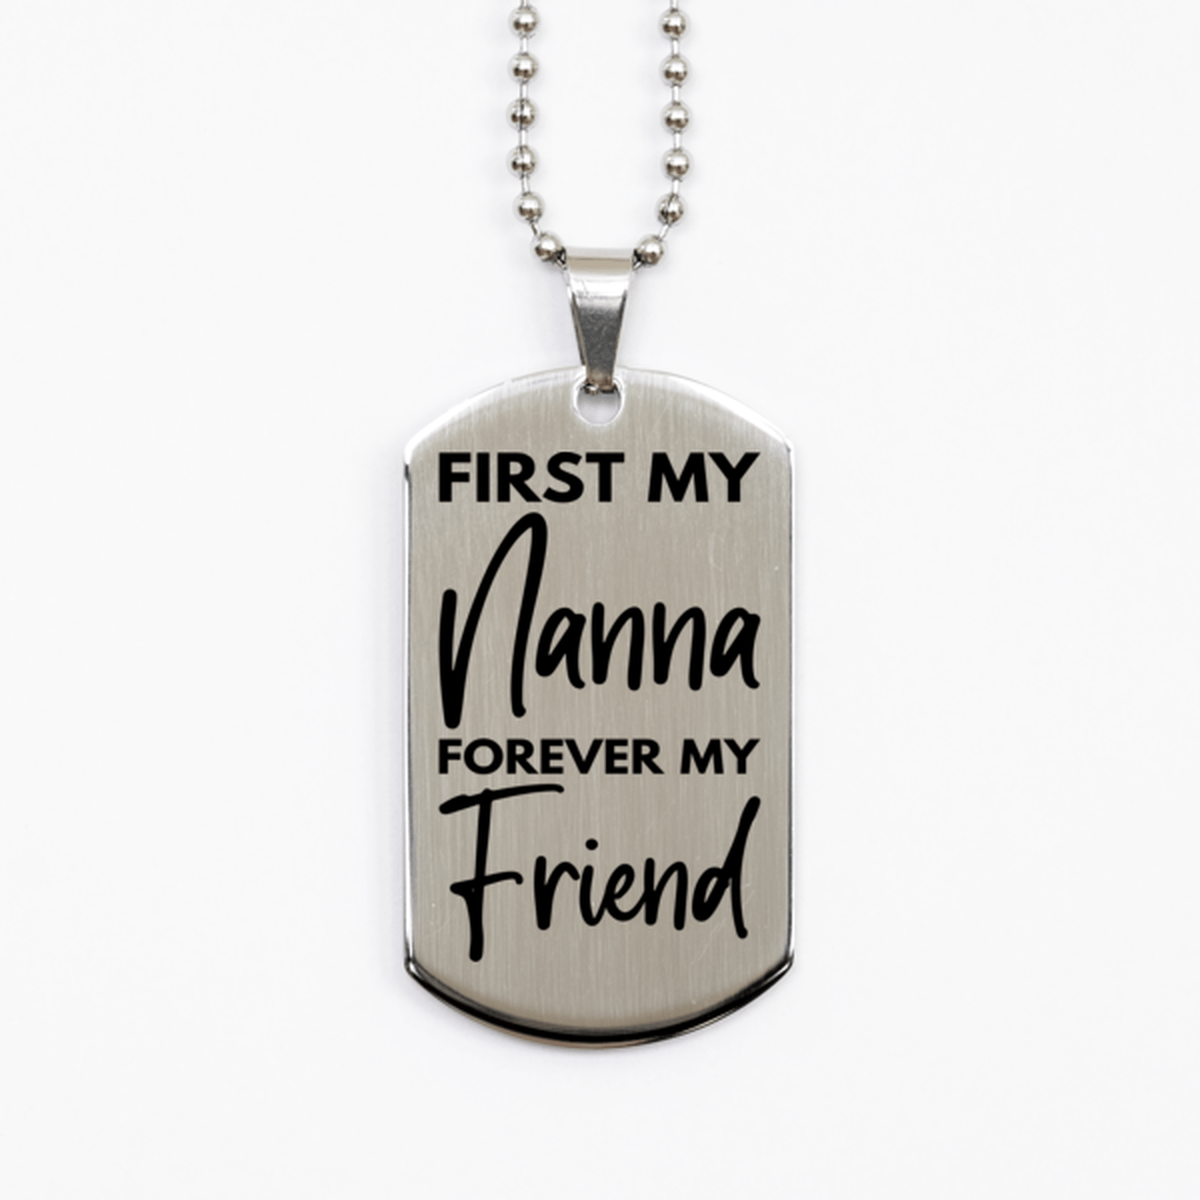 Inspirational Nanna Silver Dog Tag Necklace, First My Nanna Forever My Friend, Best Birthday Gifts for Nanna